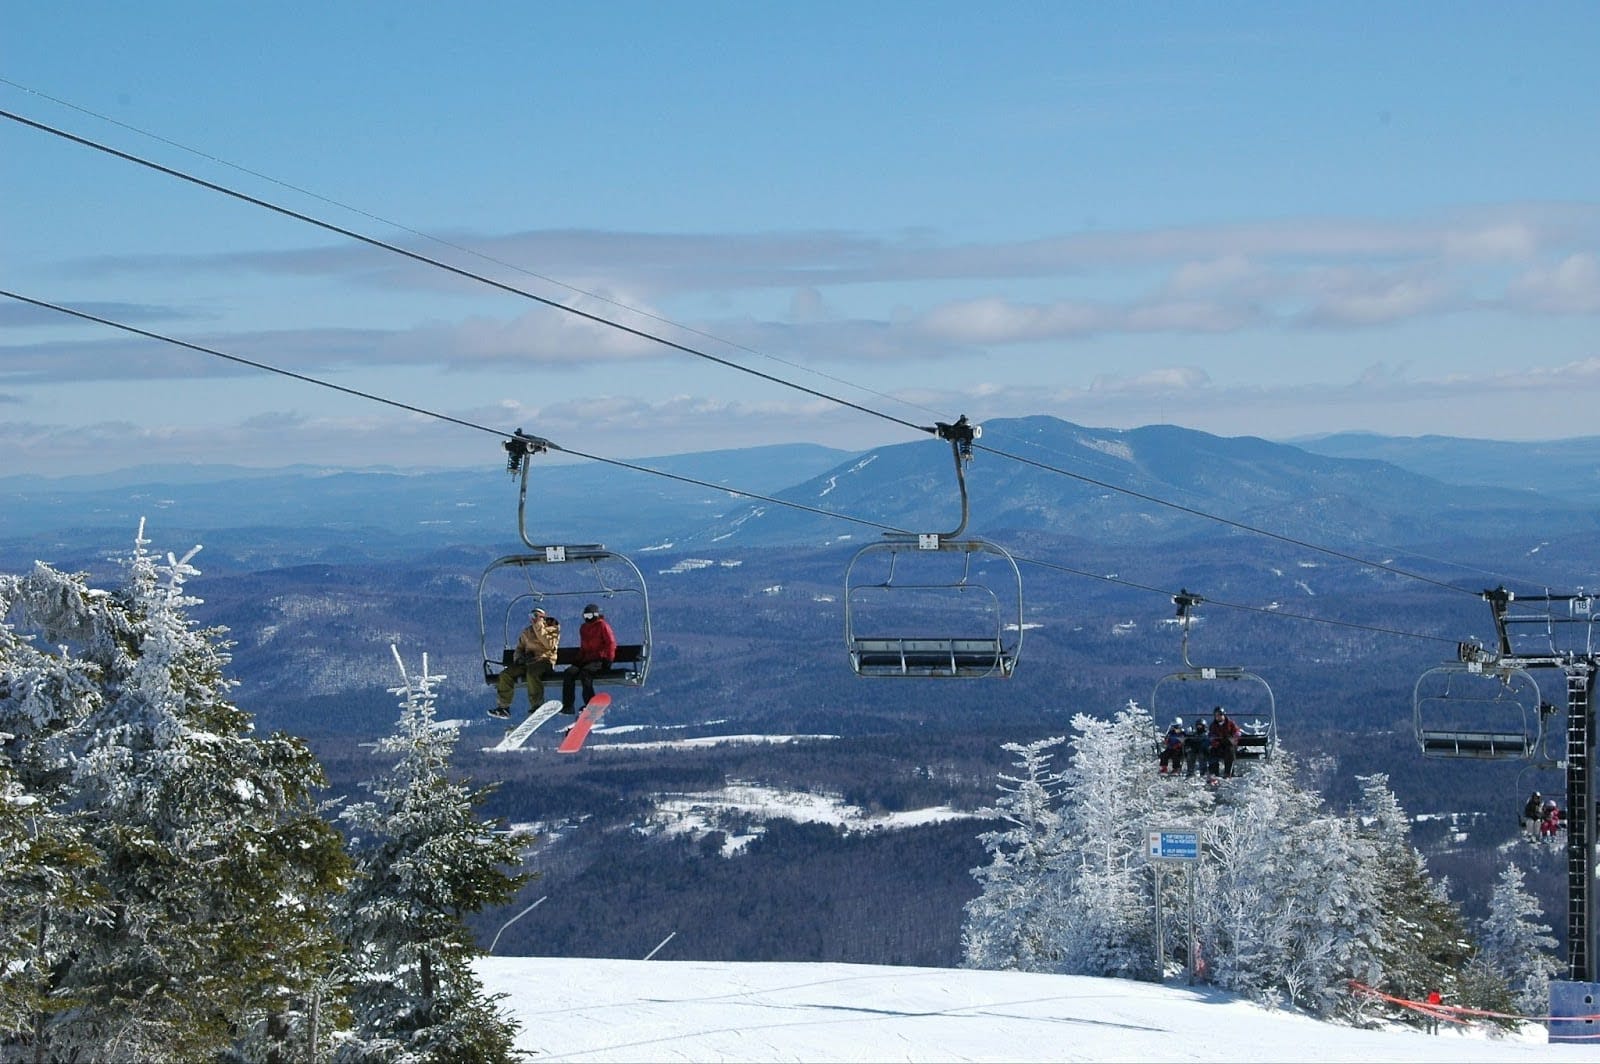 Best Places to Travel to in February - Stowe